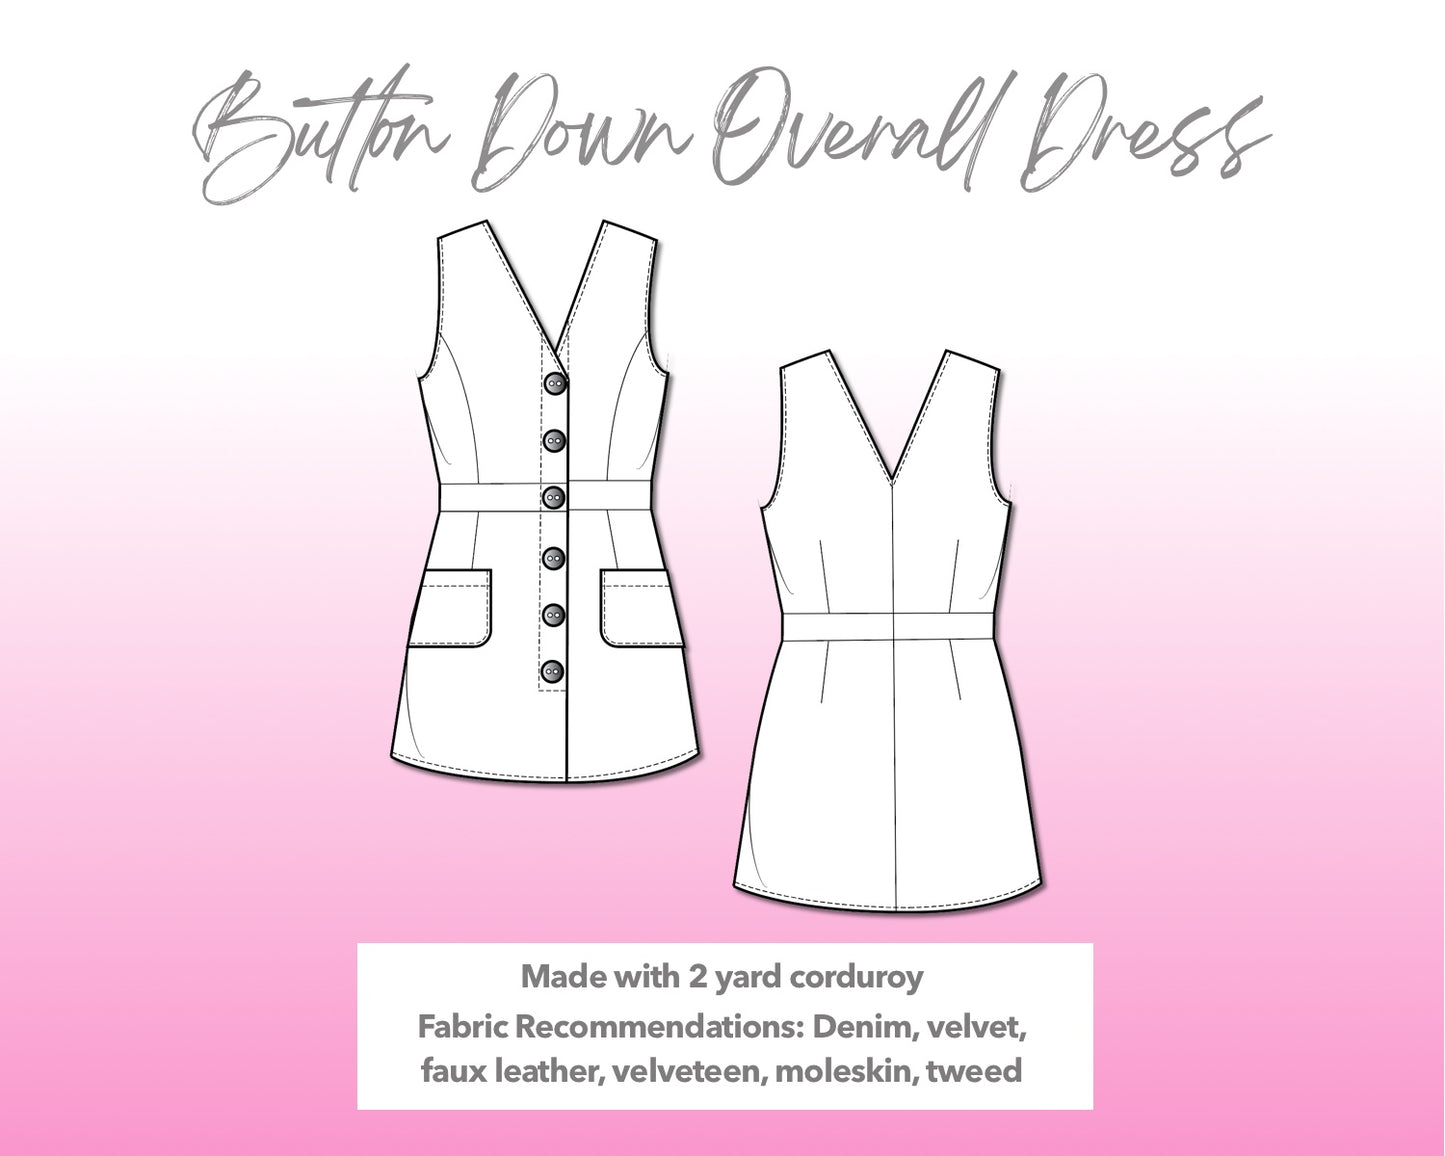 Illustration and detailed description for Button Down Overall Dress sewing pattern.